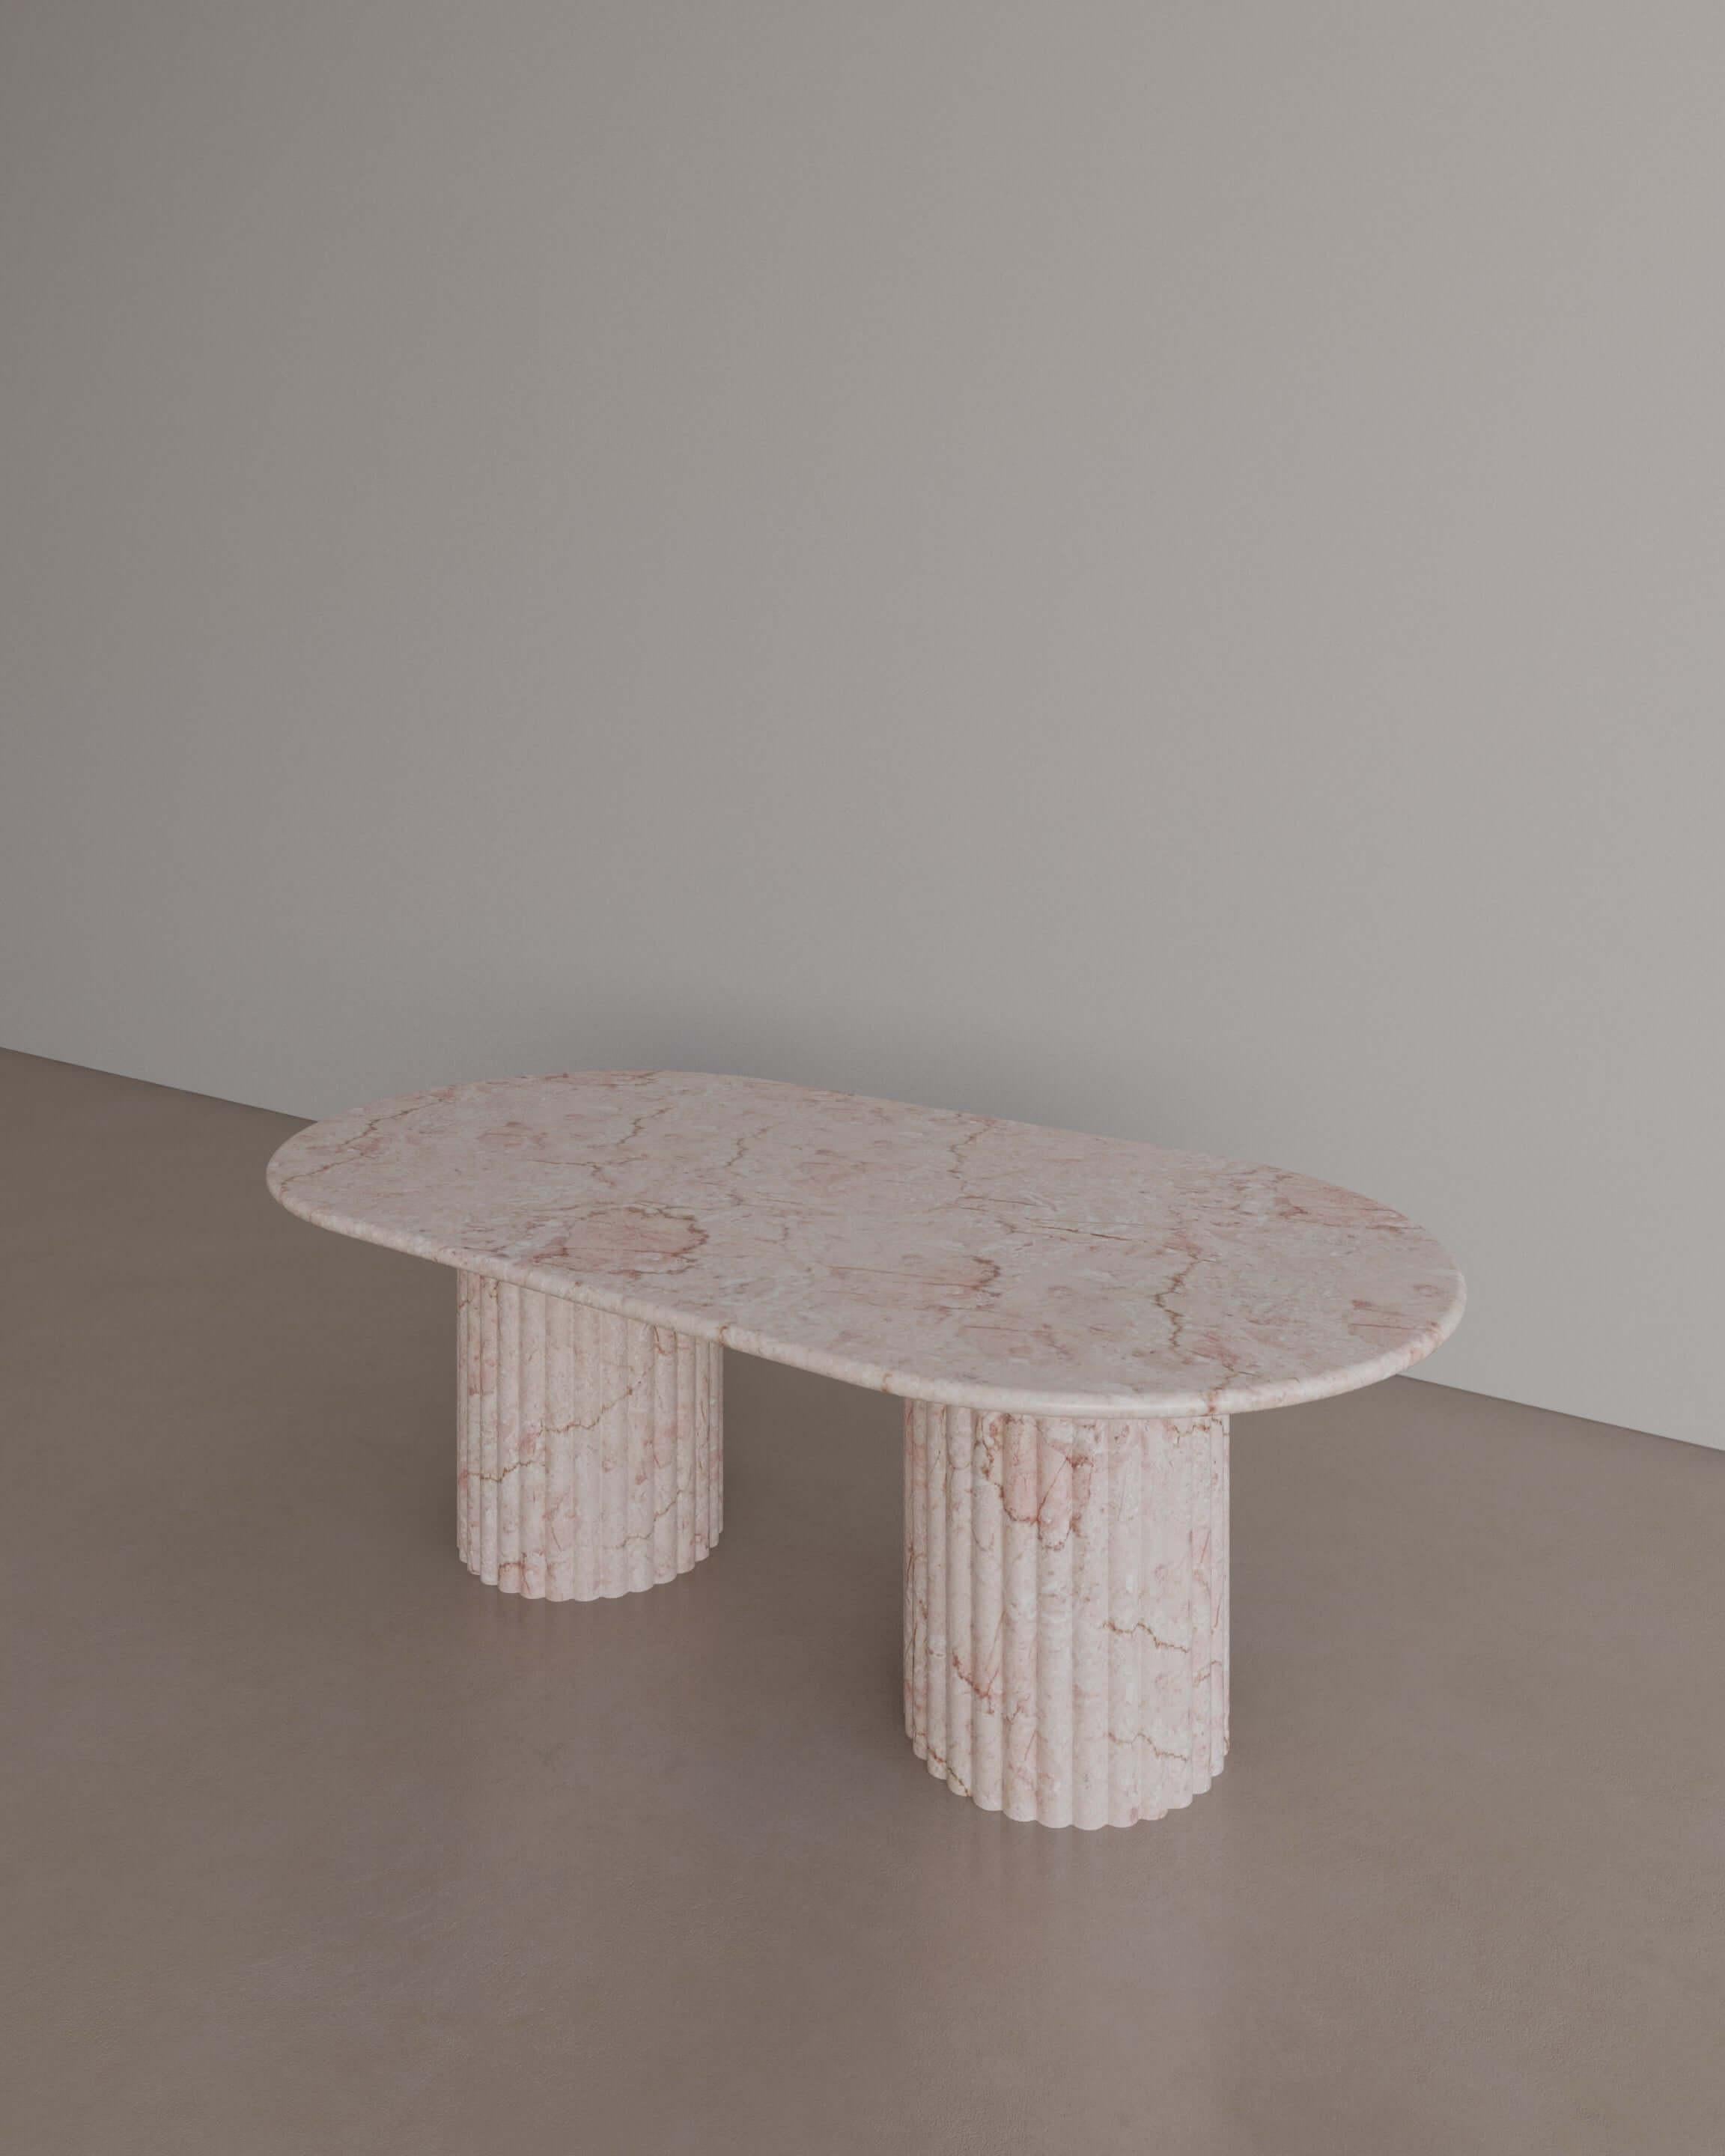 Echoing Roman architecture, The Essentialist brings you The Antica Coffee Table in Afshar Pink Marble. Embodying permanence in its veneration of whole, natural stone. A sensuous oval of stone with smooth bullnose edges rests on two generously